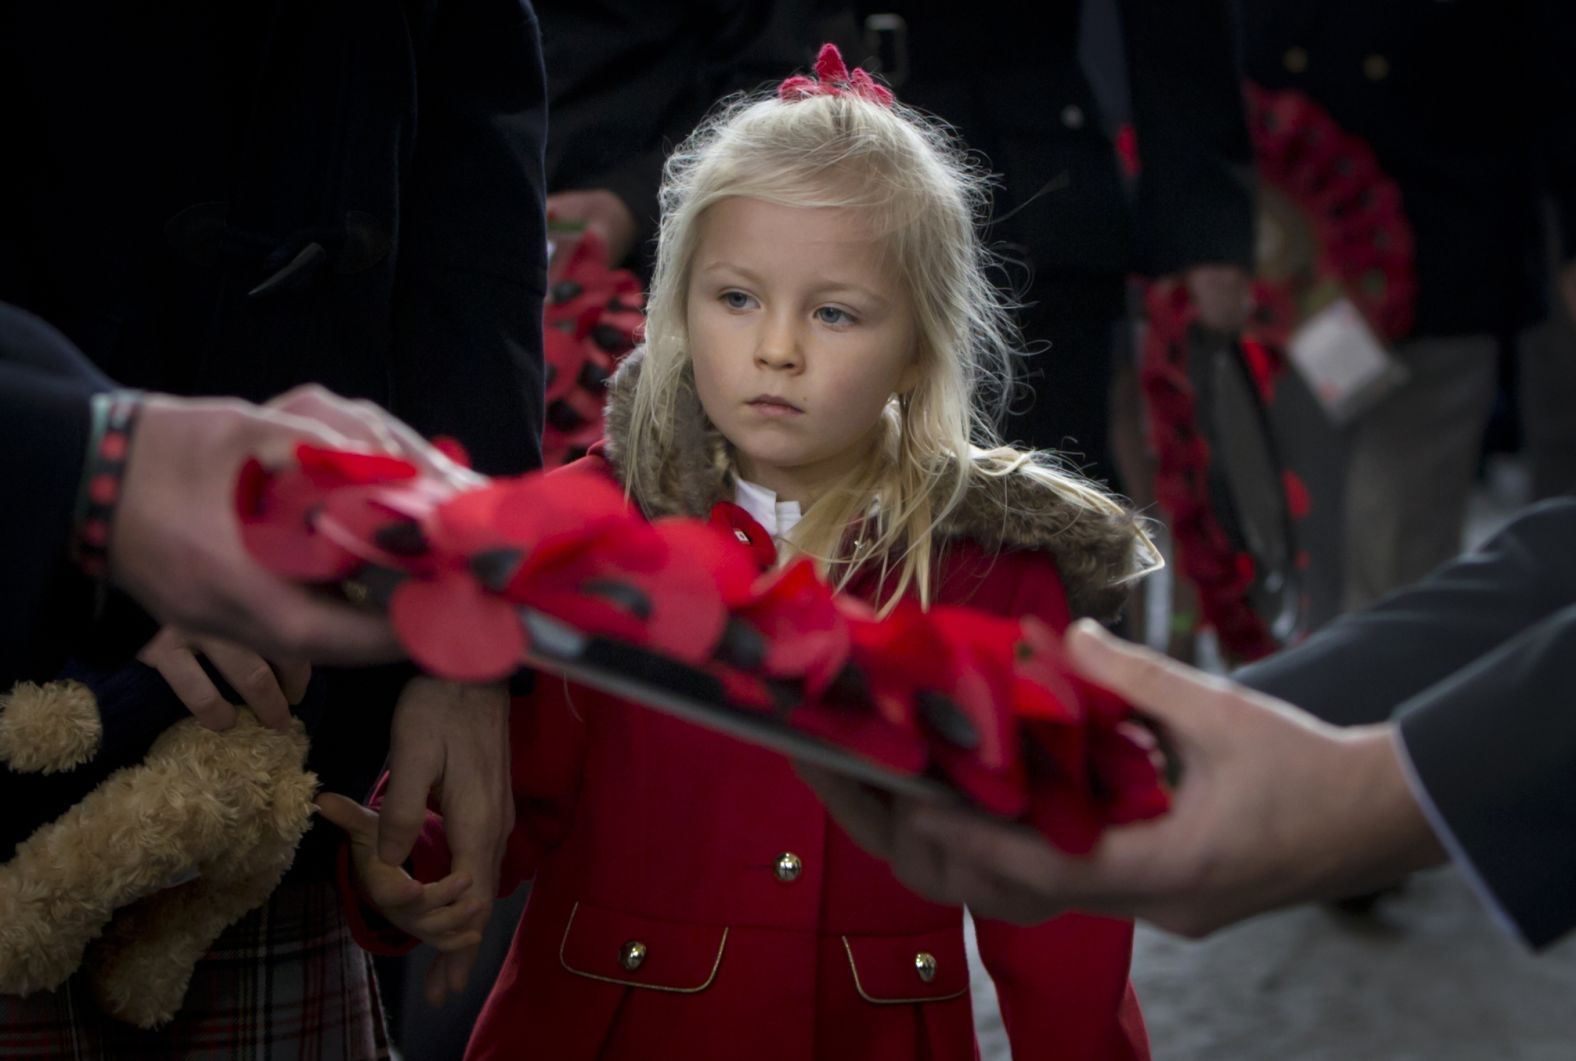 A  girl prepares to lay a poppy wreath during an Armistice ceremony at the Menin Gate in Ypres, Belgium on Sunday.